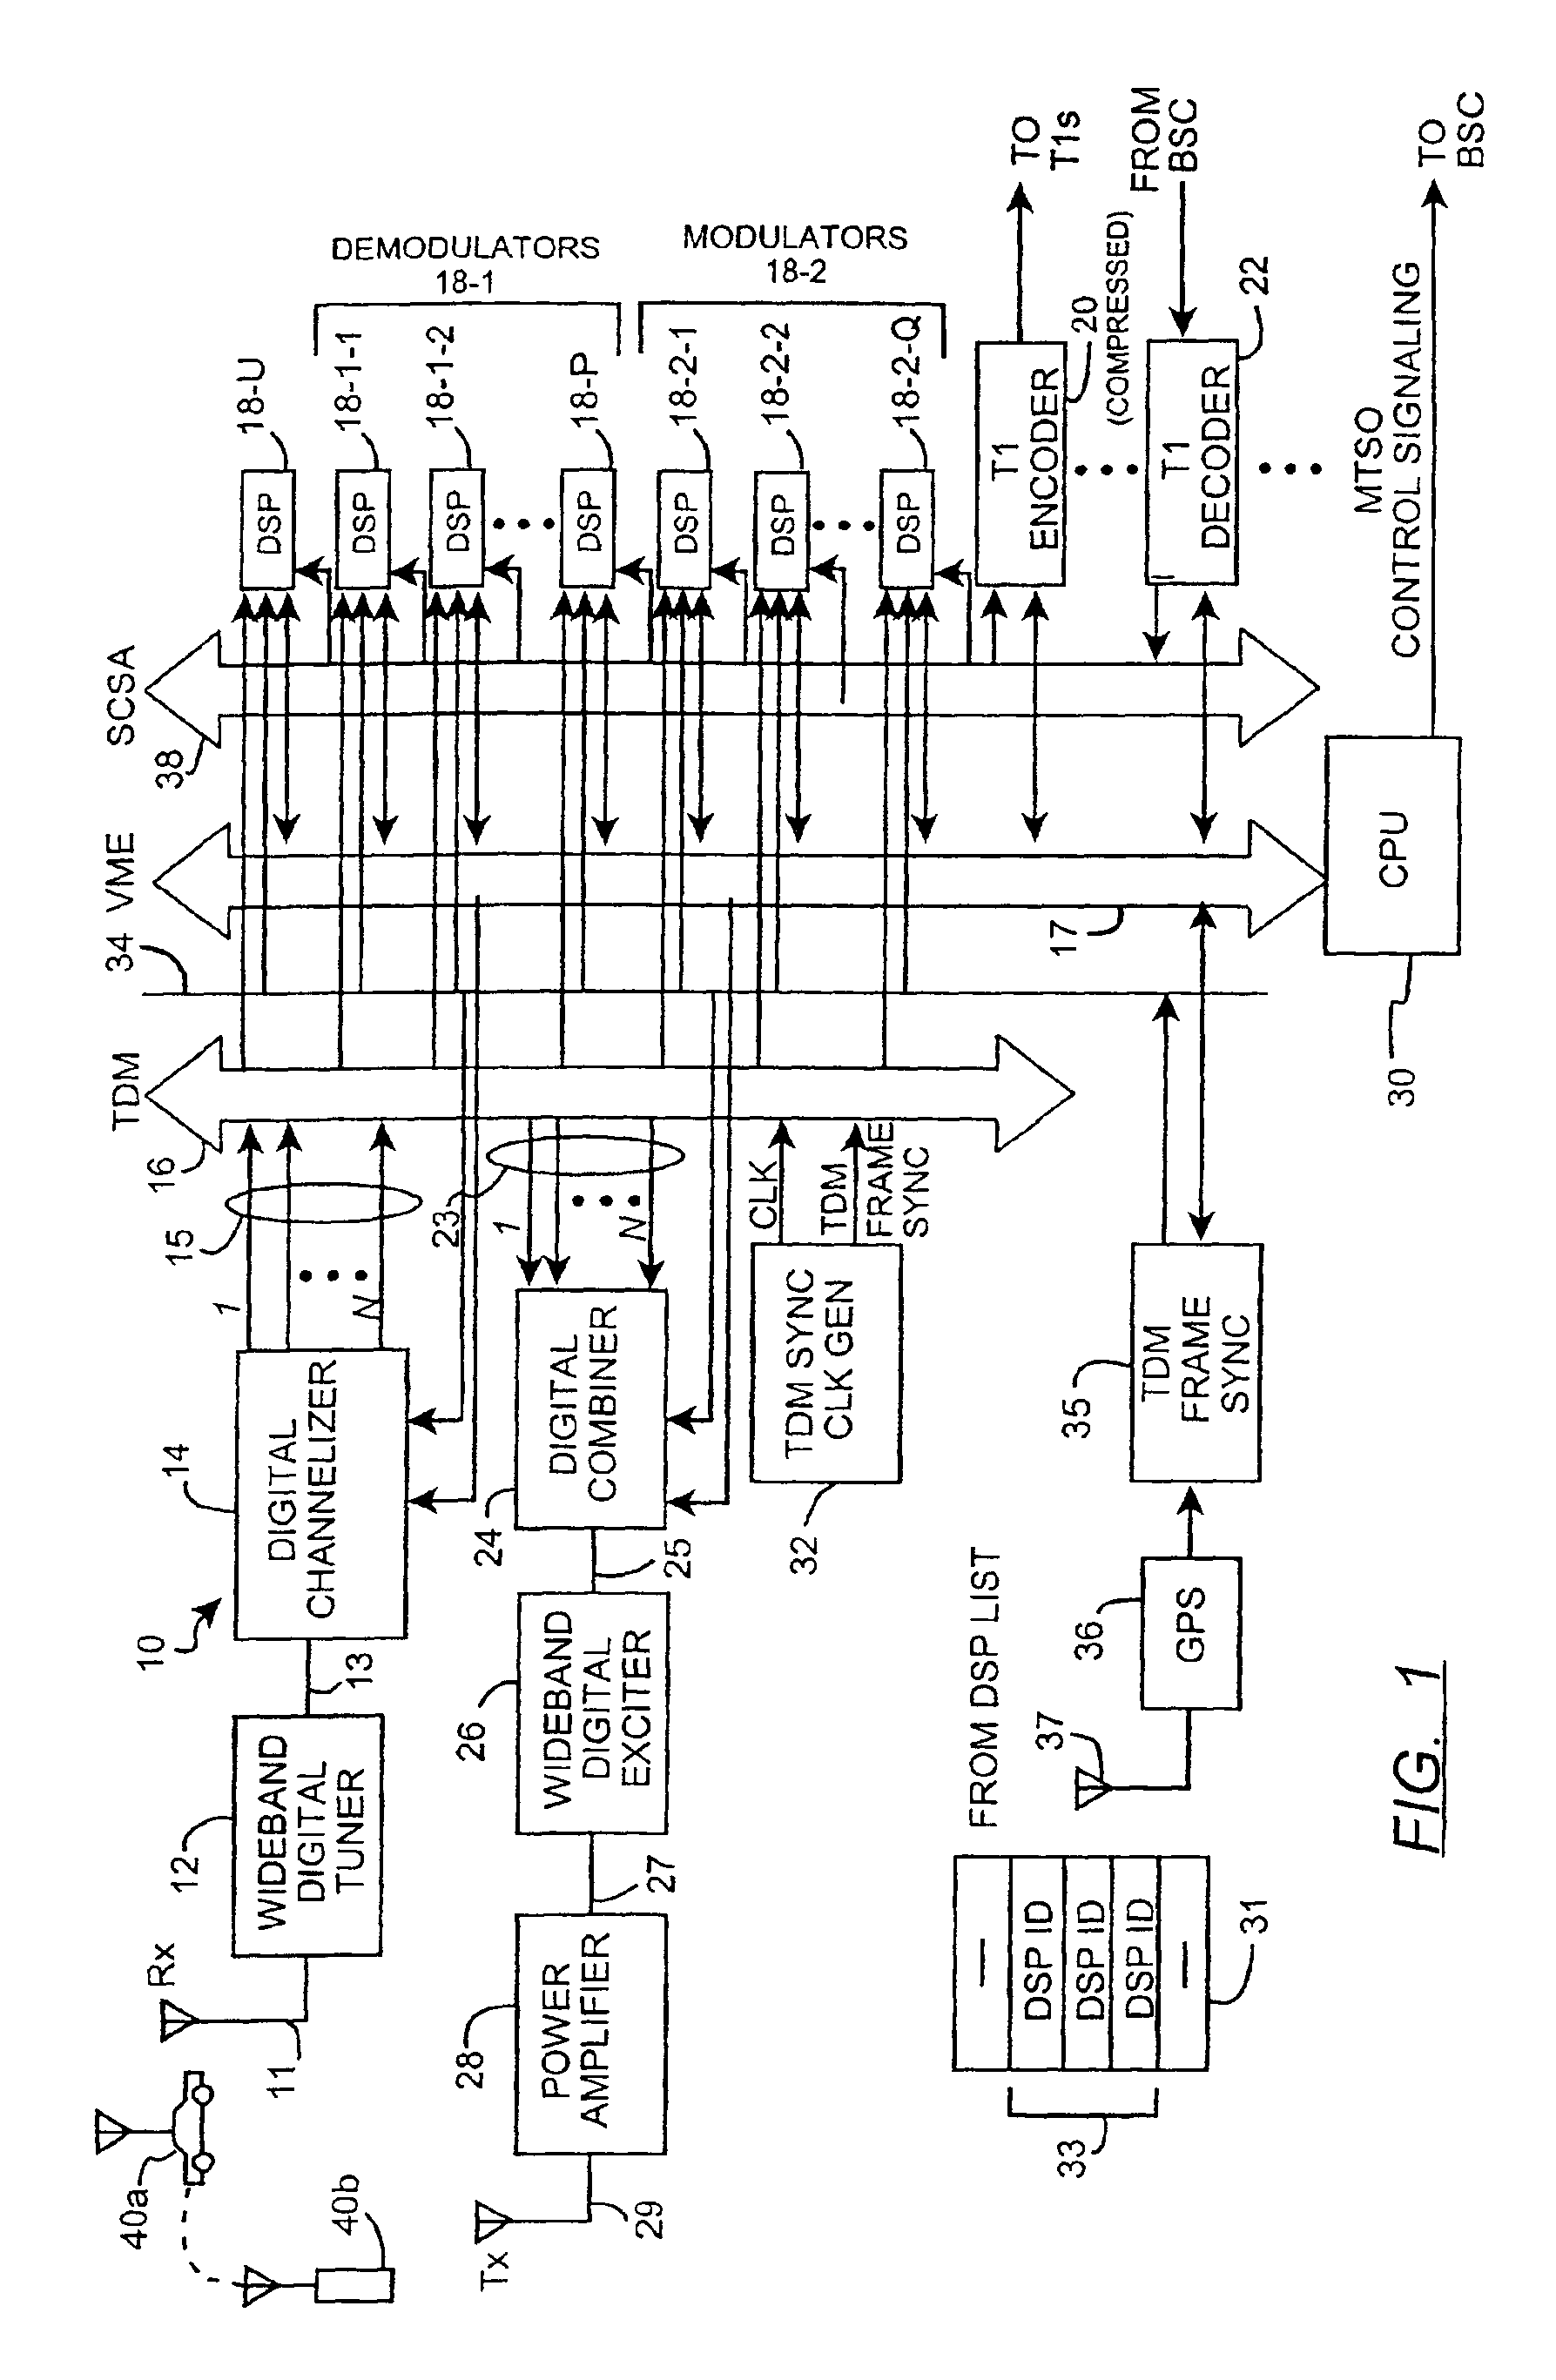 Method of baseband frequency hopping utilizing time division multiplexed mapping between a radio transceiver and digital signal processing resources